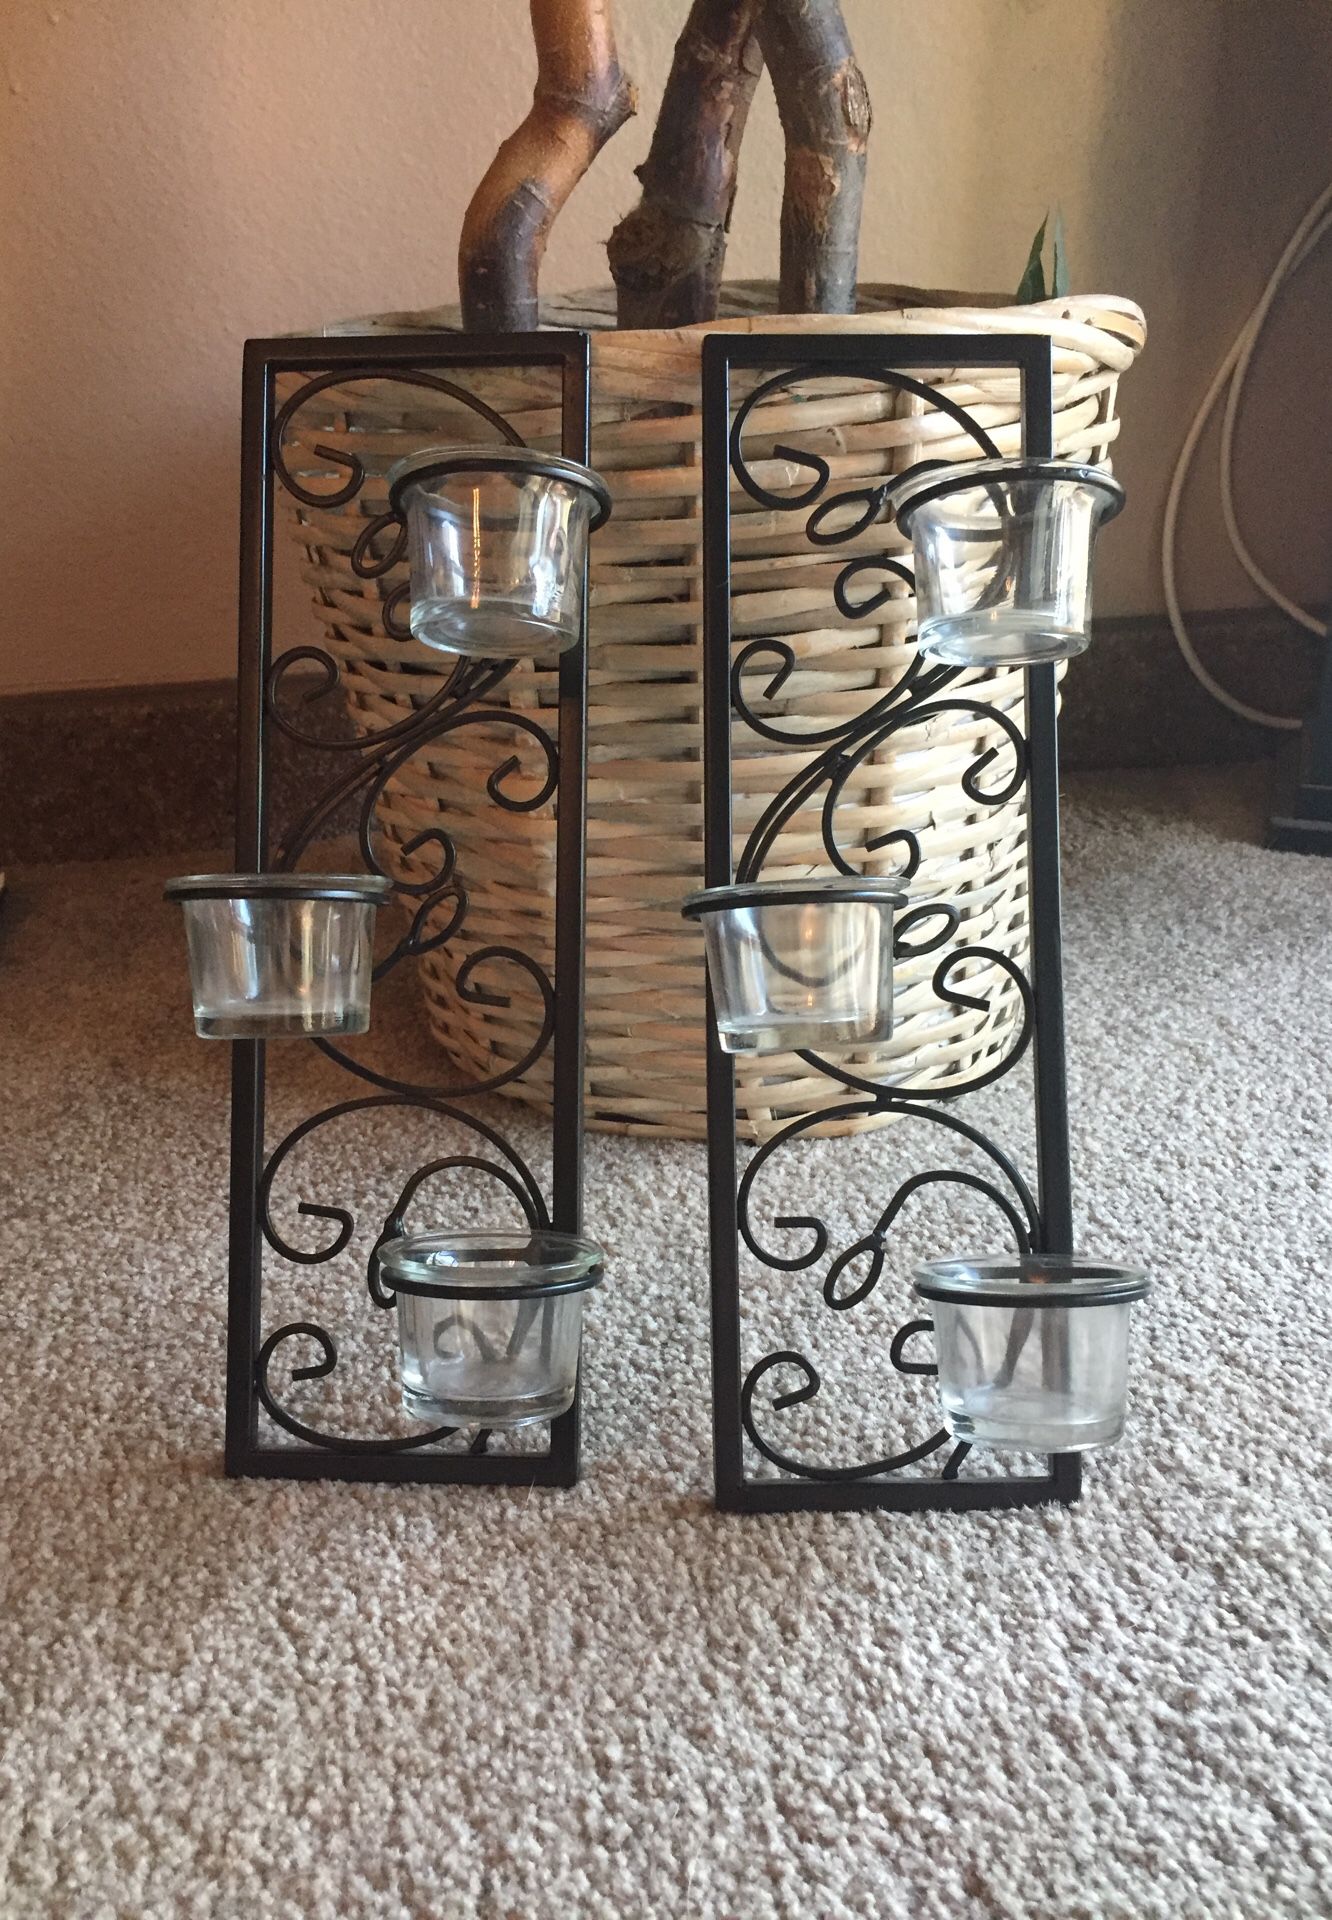 2 set, black metal with glass candle holder, wall decor